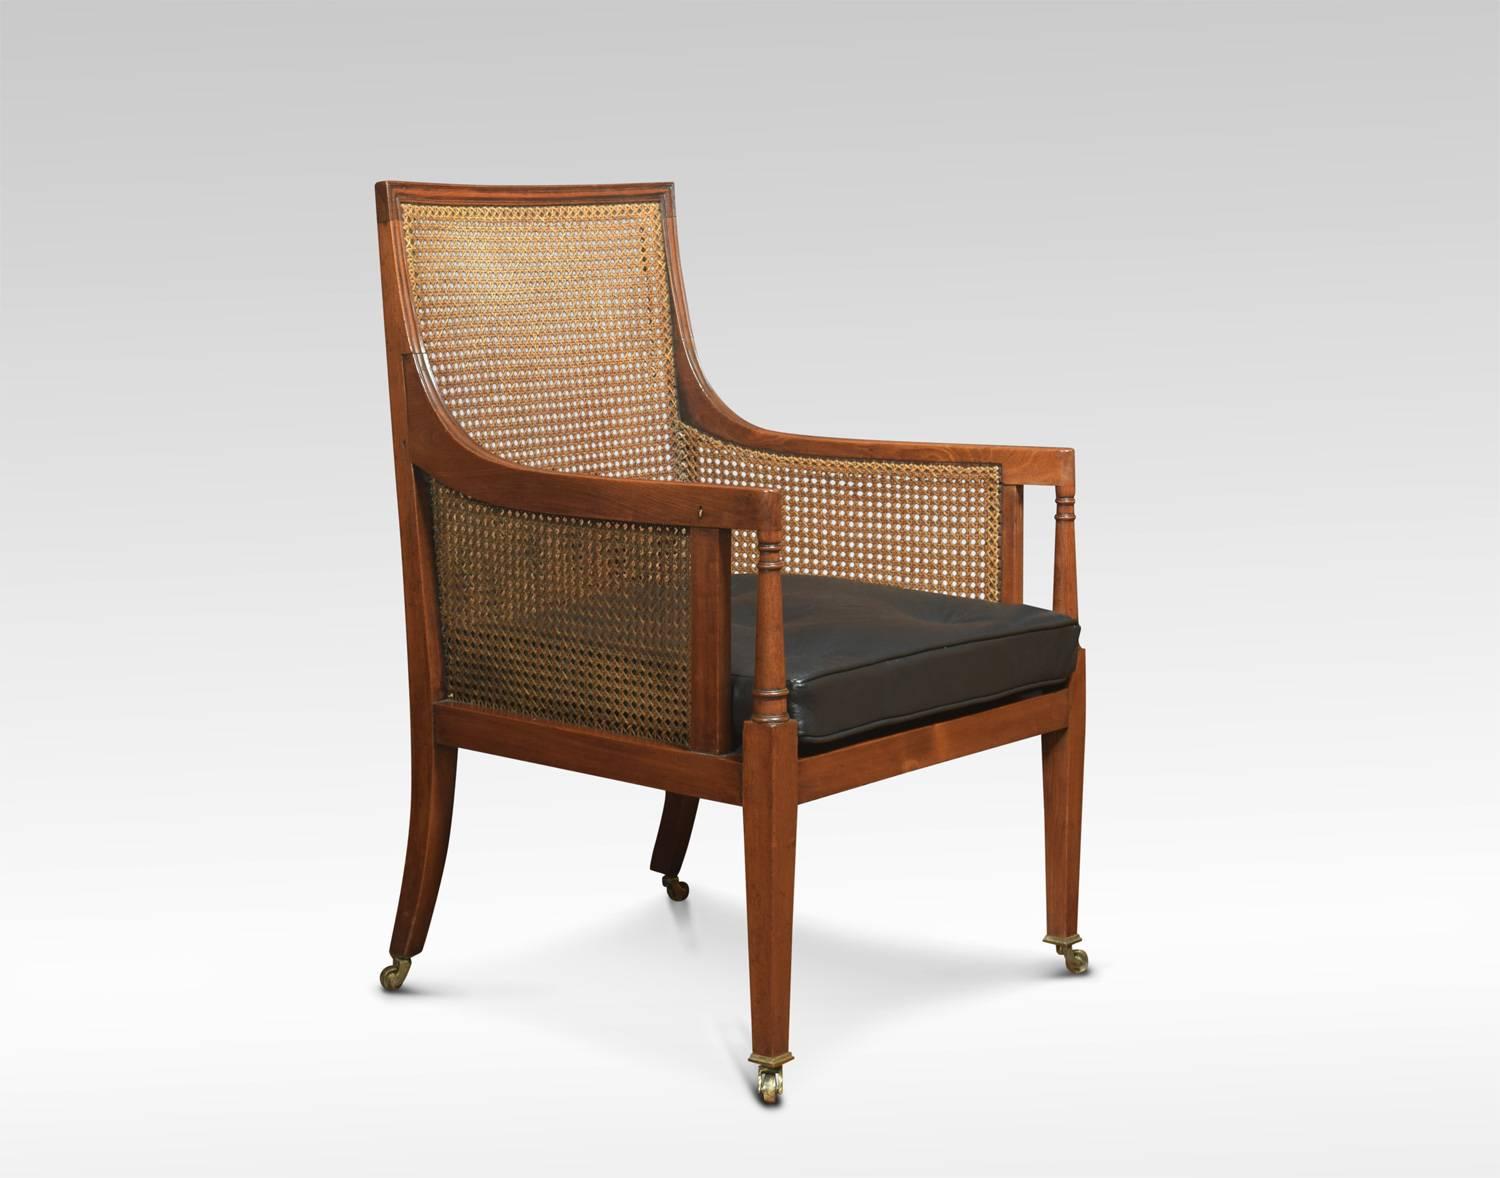 Edwardian Bergere armchair, the solid mahogany frame and inset bergere back and seat with removable black leather cushion. Raised up on turned tapering legs. Terminating in brass caps and castors.

Dimensions:
Height 37 height to seat 18